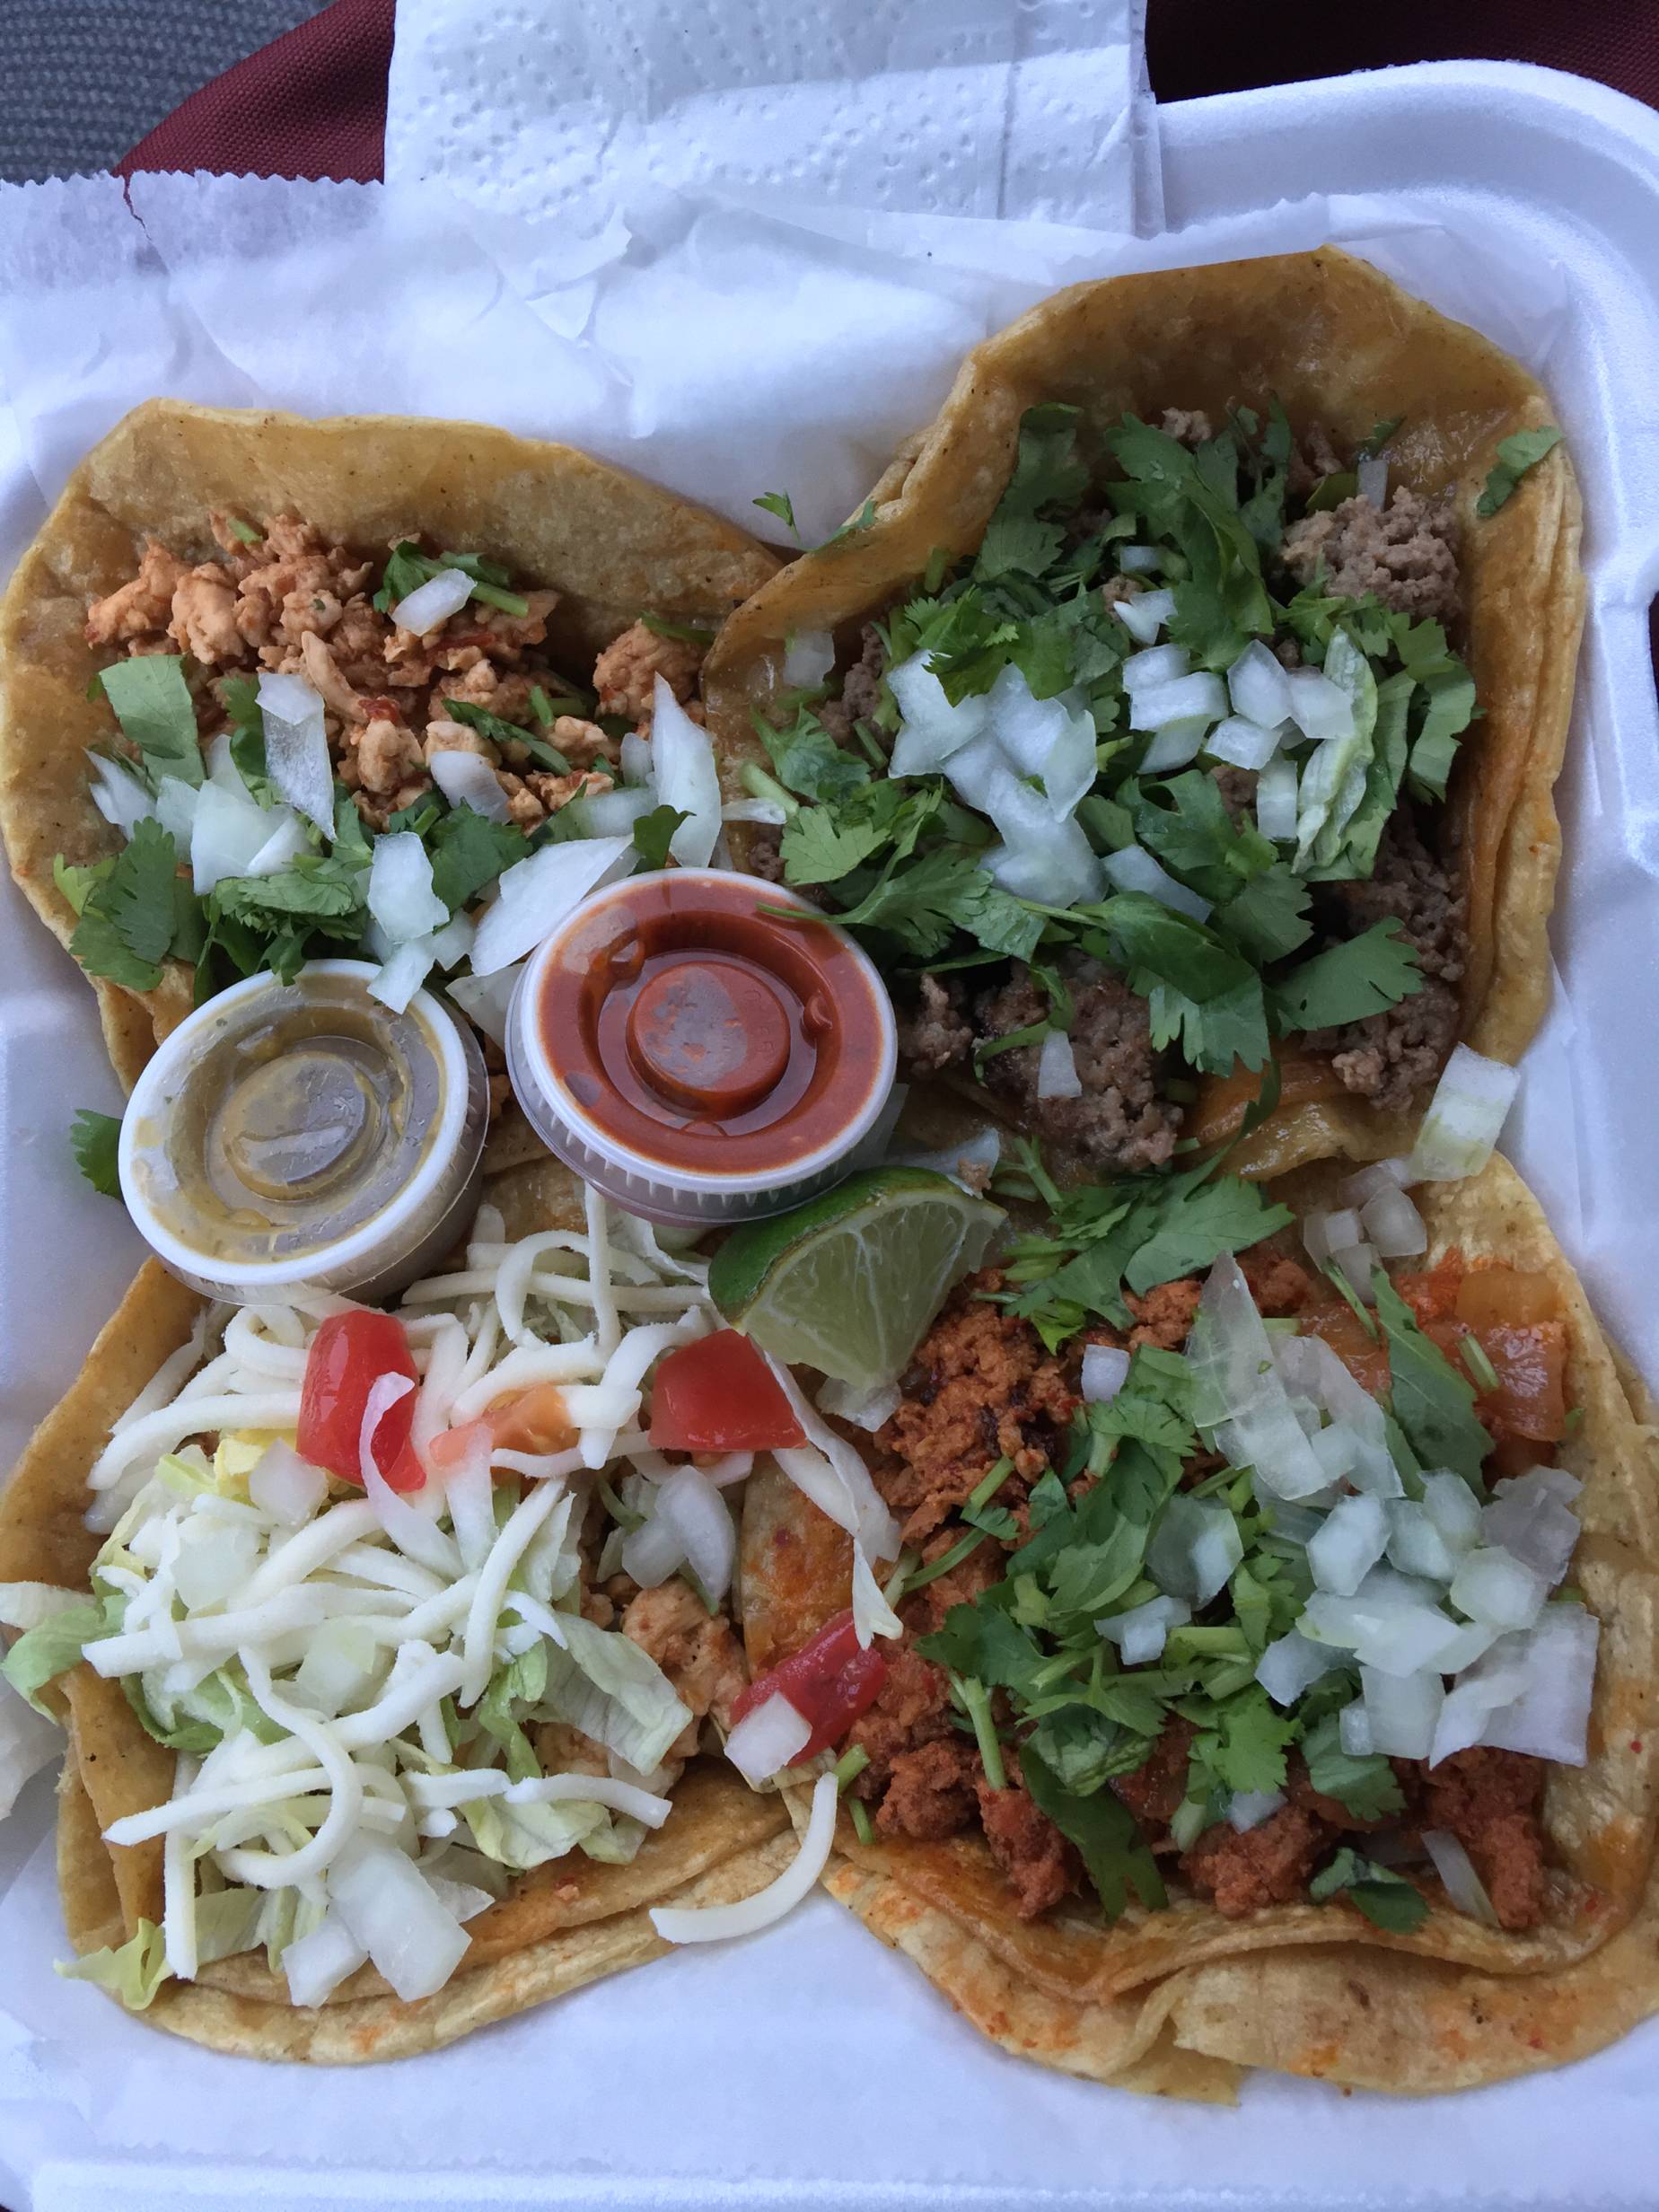 Juanito’s Tacos: A hidden taco truck worth the search